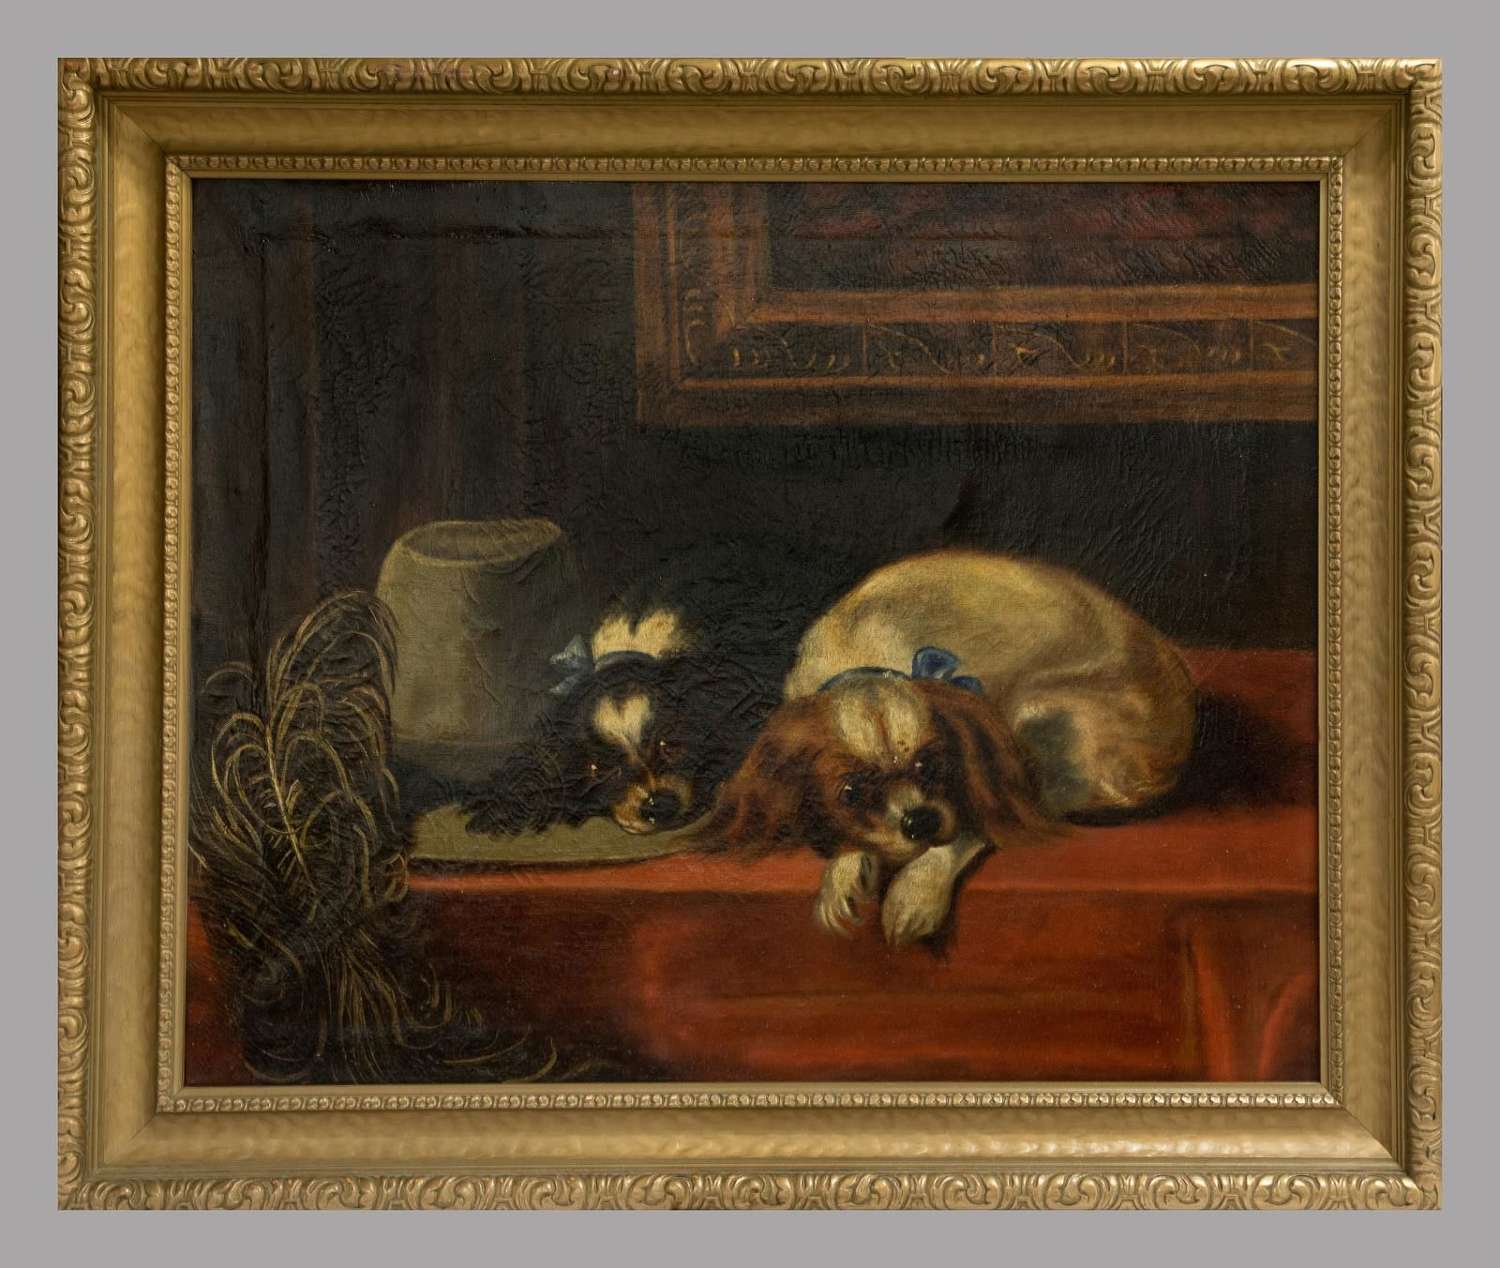 After Landseer - King Charles Spaniels - Oil on Canvas - Early 20thc